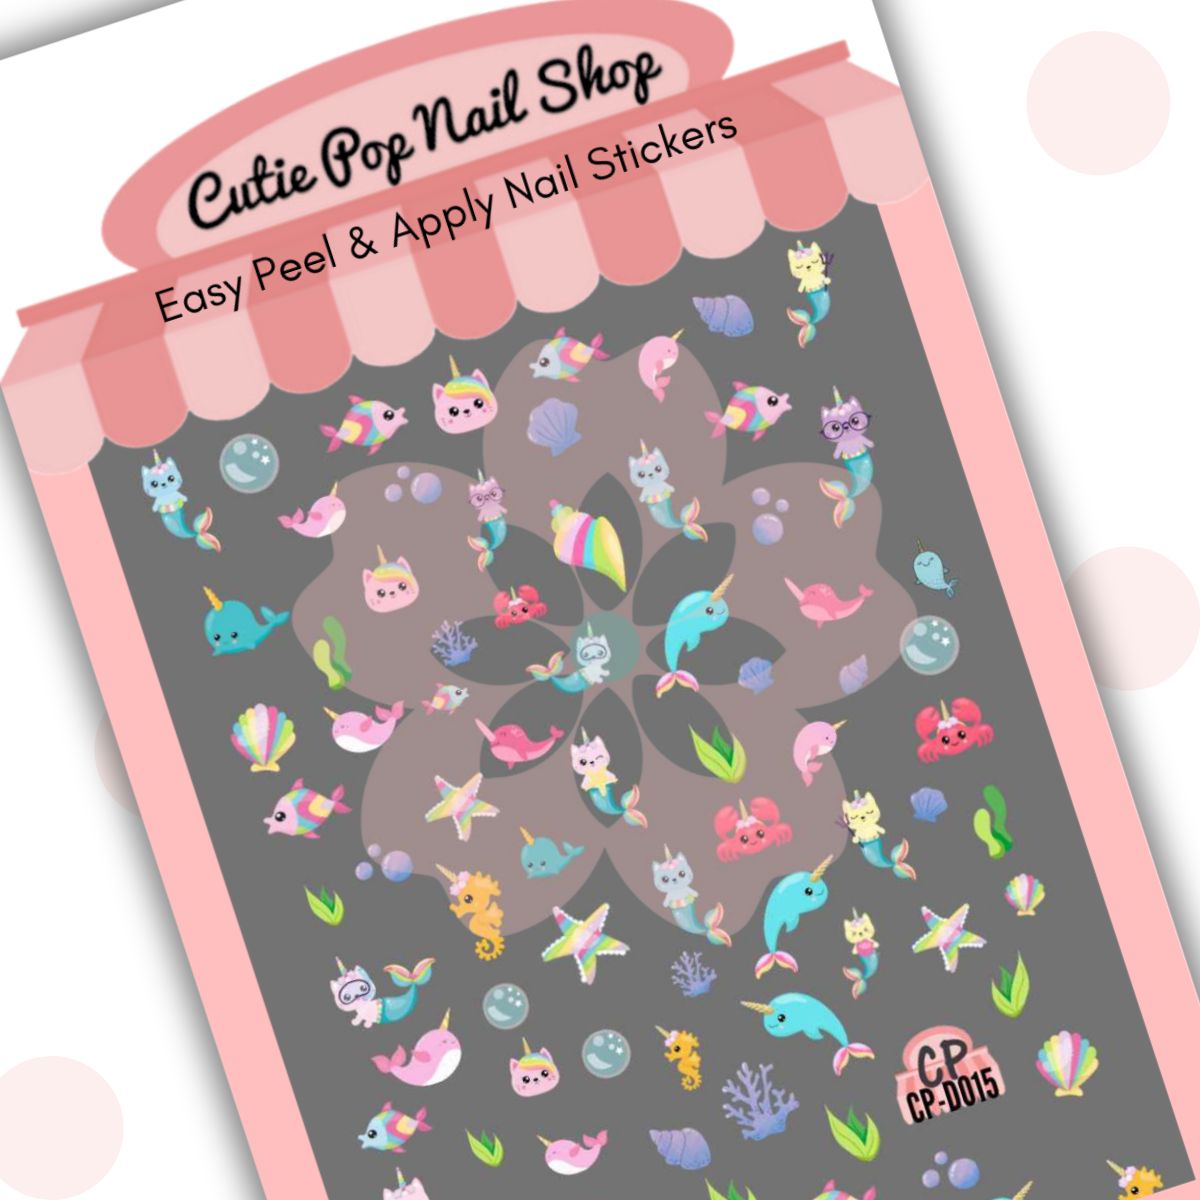 Cutie Pop Nail Shop’s Narwhals & Caticorns nail decals. Design includes seahorses with a unicorn horn, a cat mermaid with a unicorn horn (caticorn), a pink narwhal with a unicorn horn, a blue narwhal with a unicorn horn, an air bubble, a red crab, seaweed, clue coral, a green sea plant, a pink cat head with rainbow-colored hair and a unicorn horn, a multicolored fish, and a range of multicolored shells.